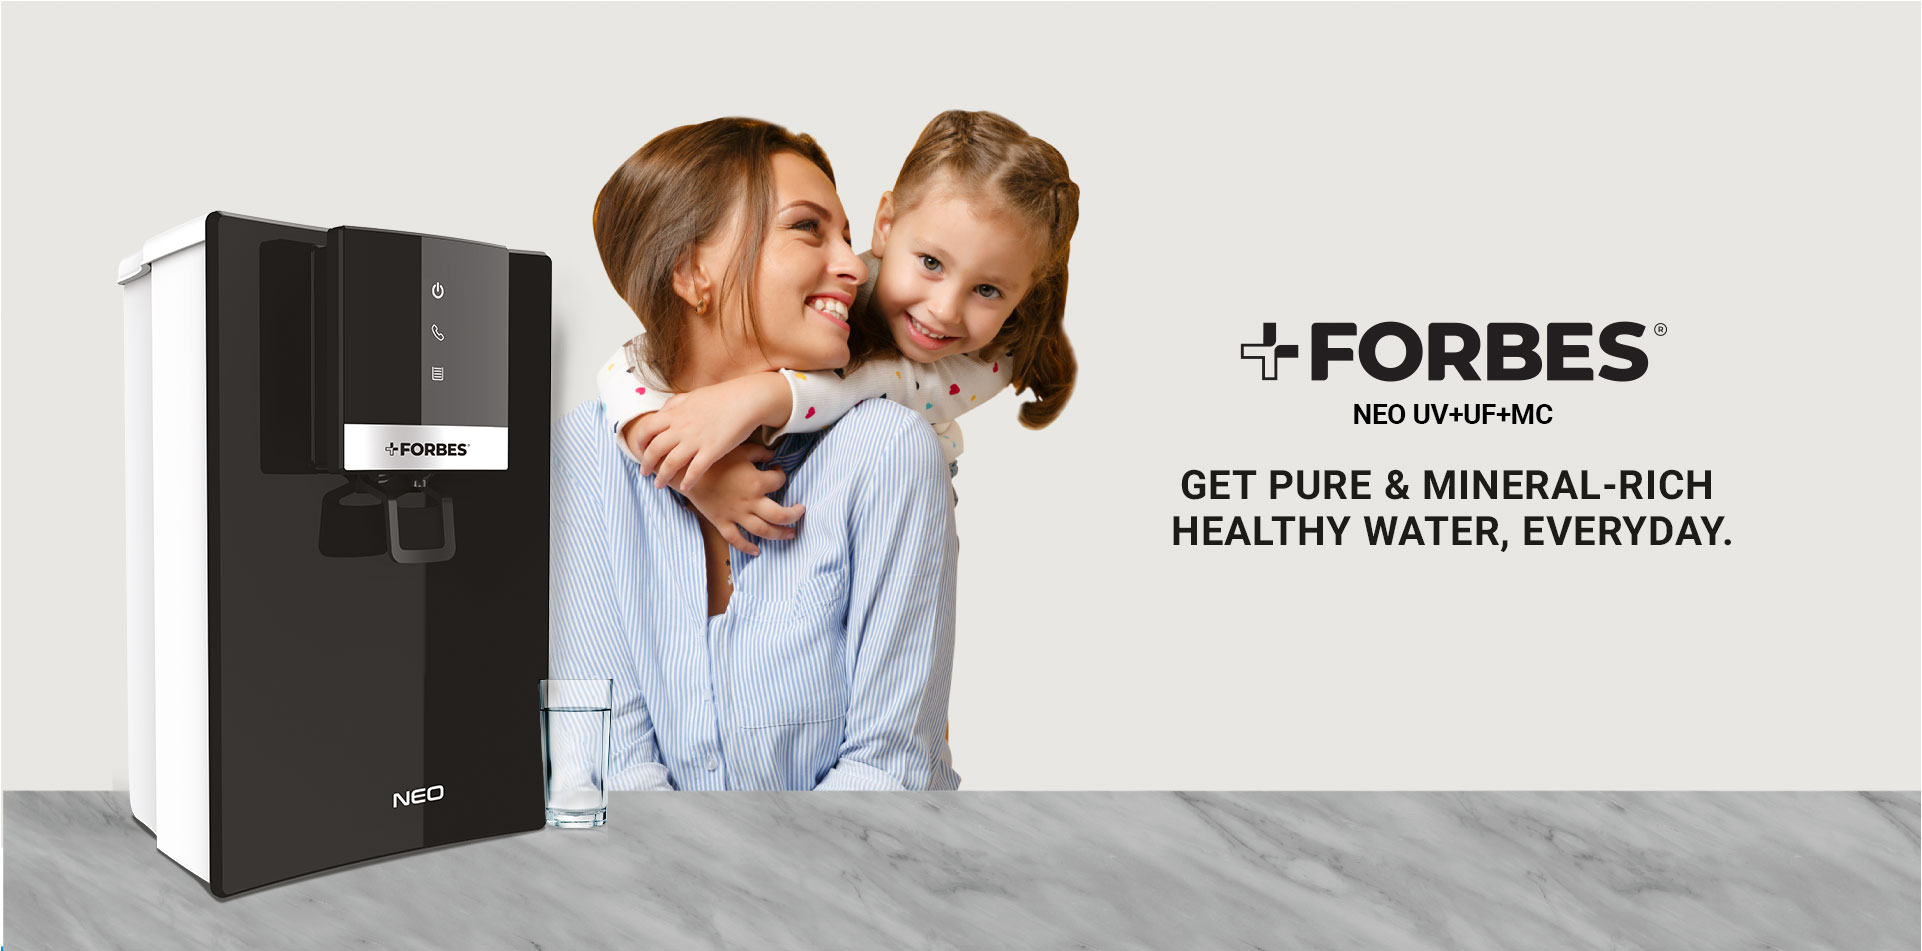 FORBES NEO UV+UF+MC GET PURE & MINERAL-RICH HEALTHY WATER, EVERYDAY.